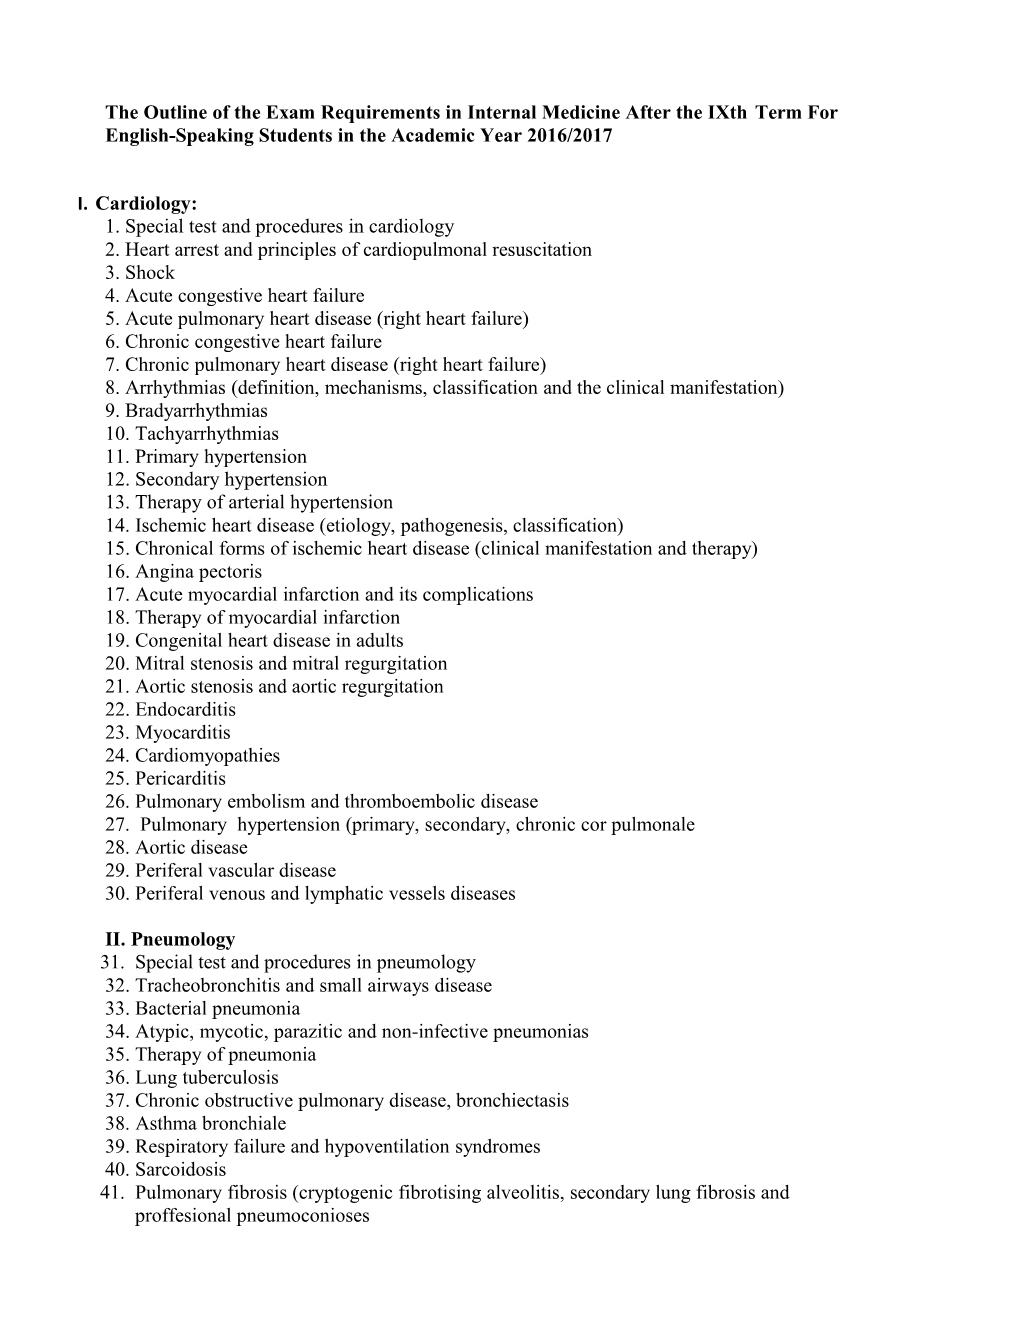 The Outline of the Exam Requirements Ininternal Medicine After the Ixthterm for English-Speaking